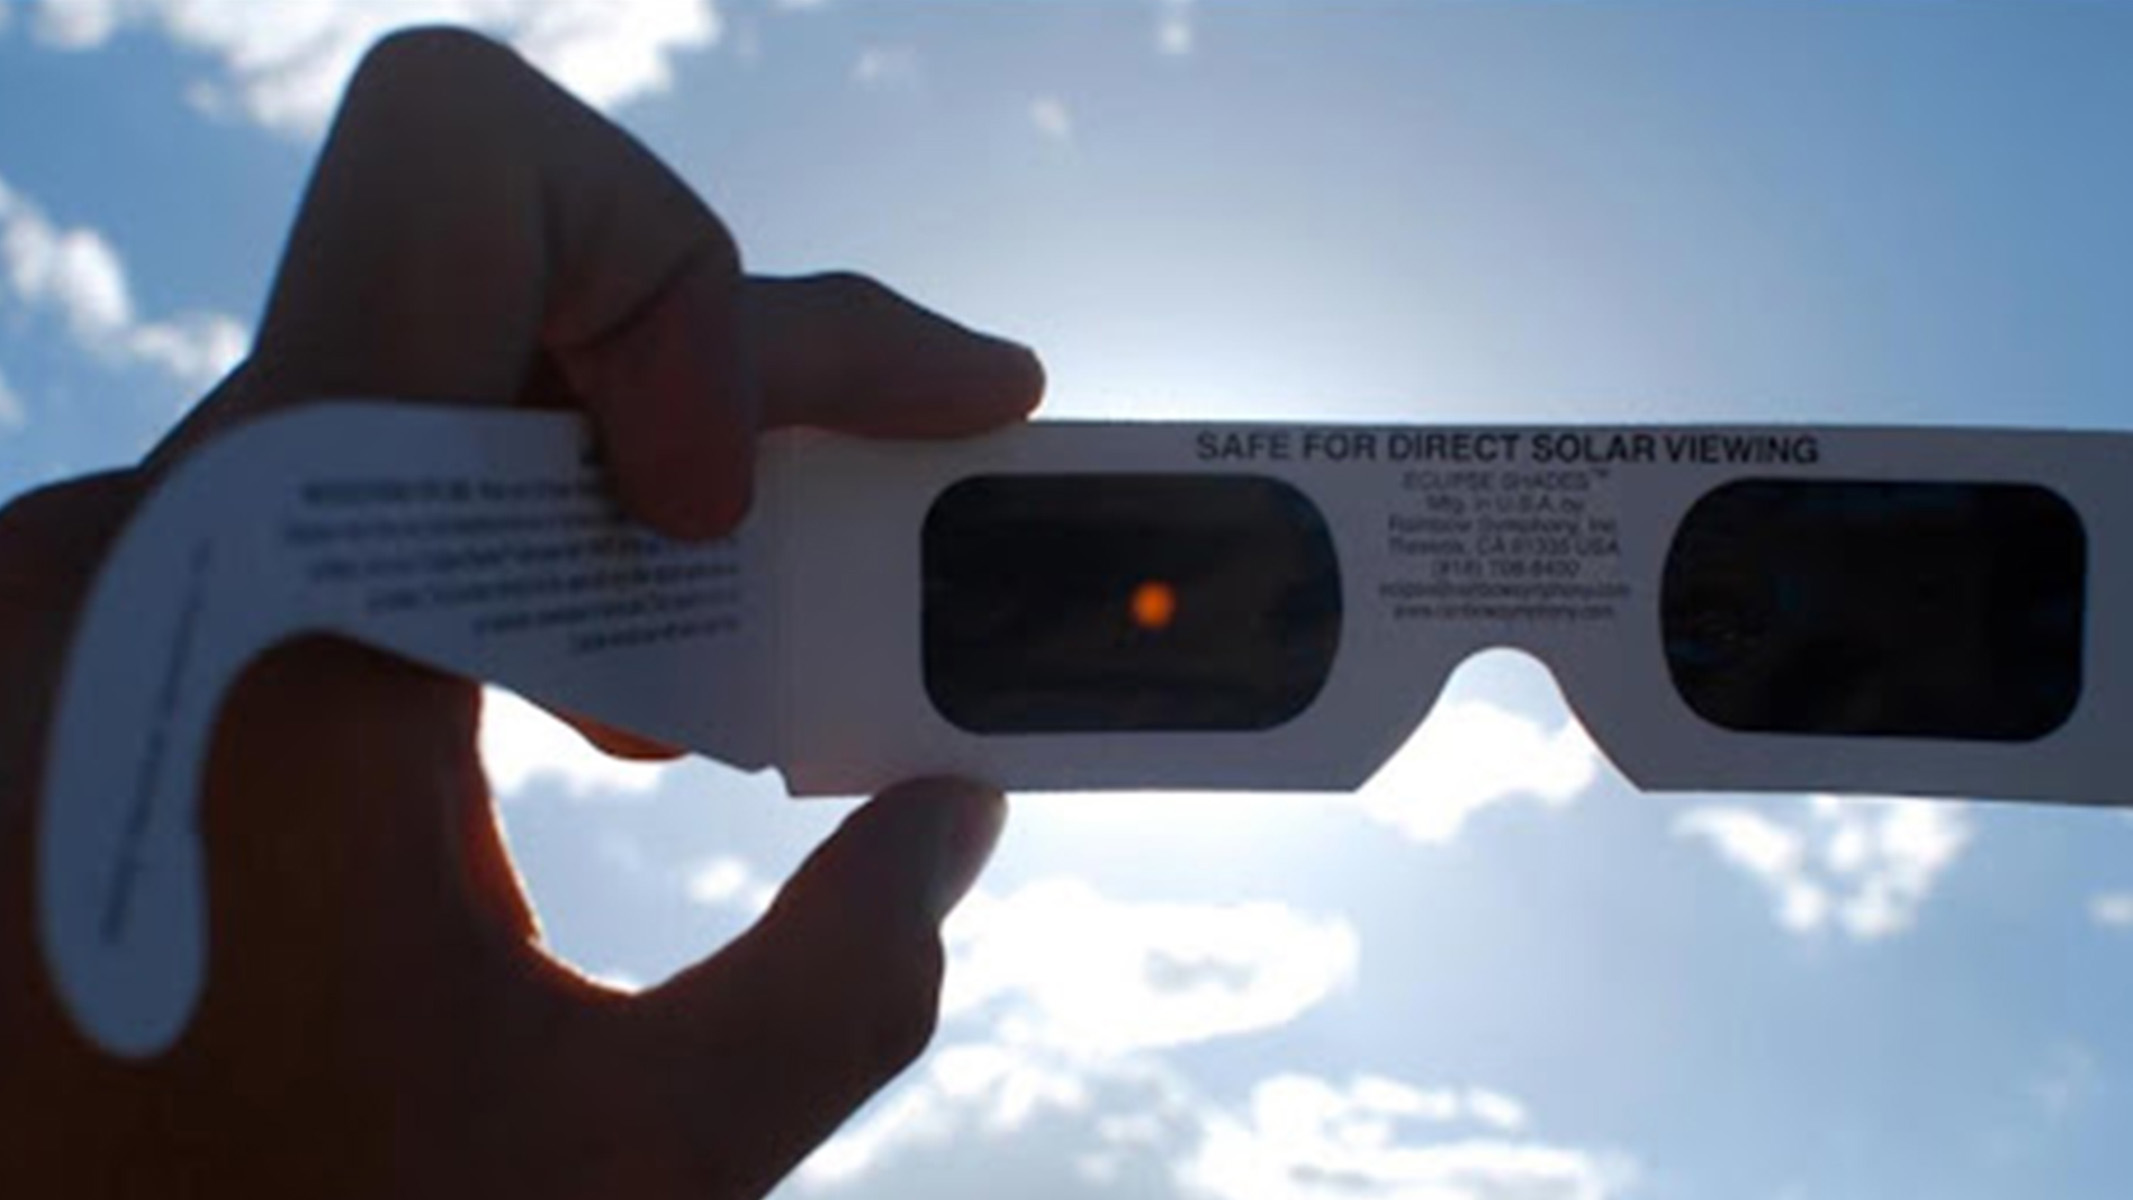 A pair of cardboard solar glasses being inspected